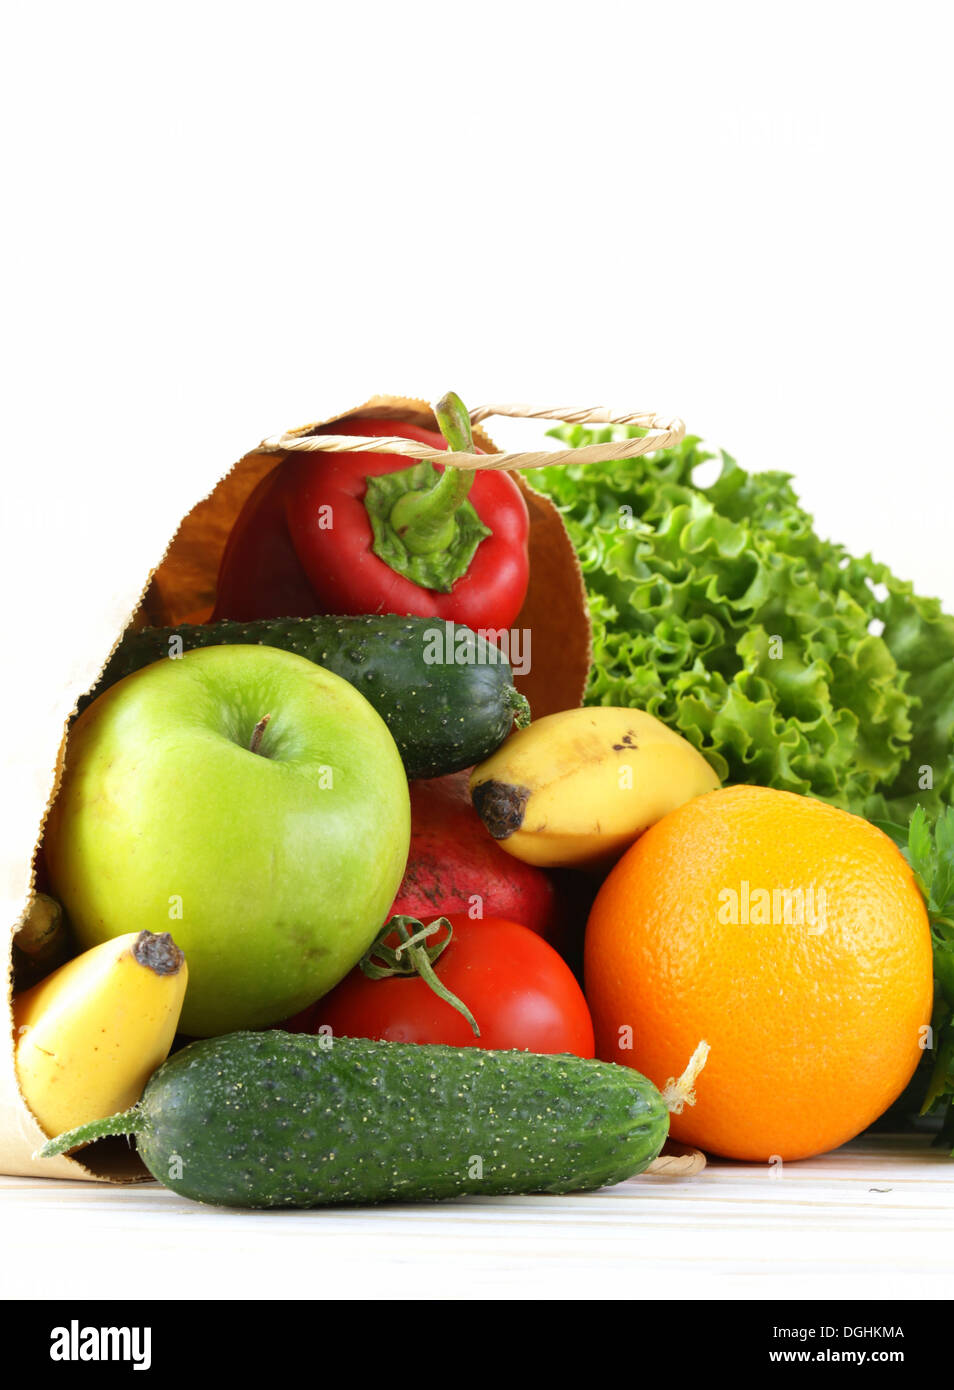 set of different convenience food (vegetables fruit) in a paper bag Stock Photo